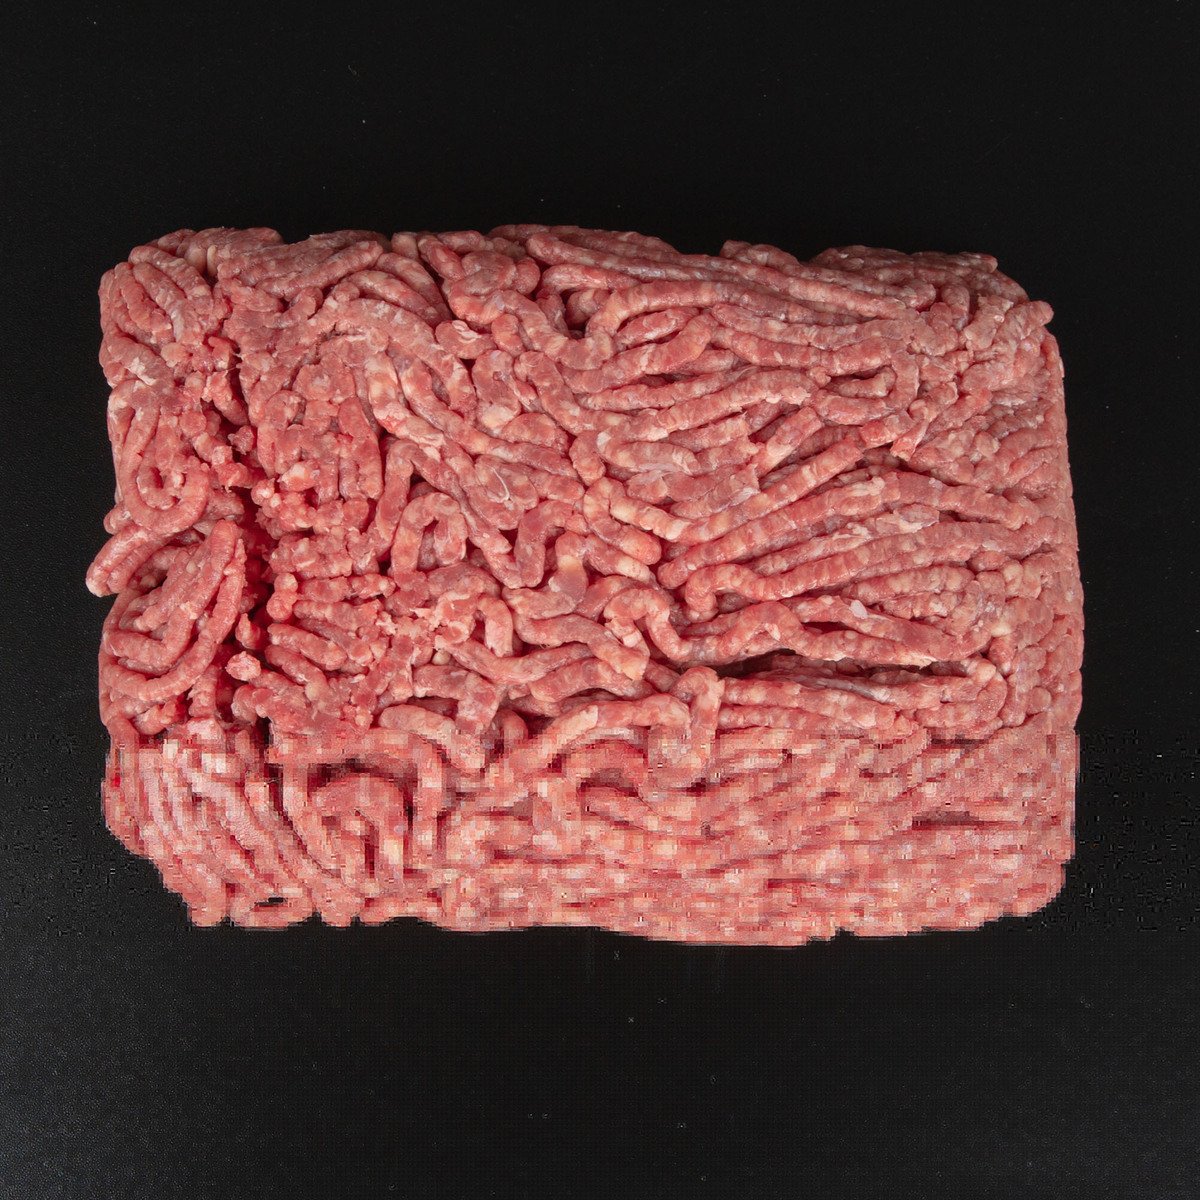 South African Minced Beef 500 g